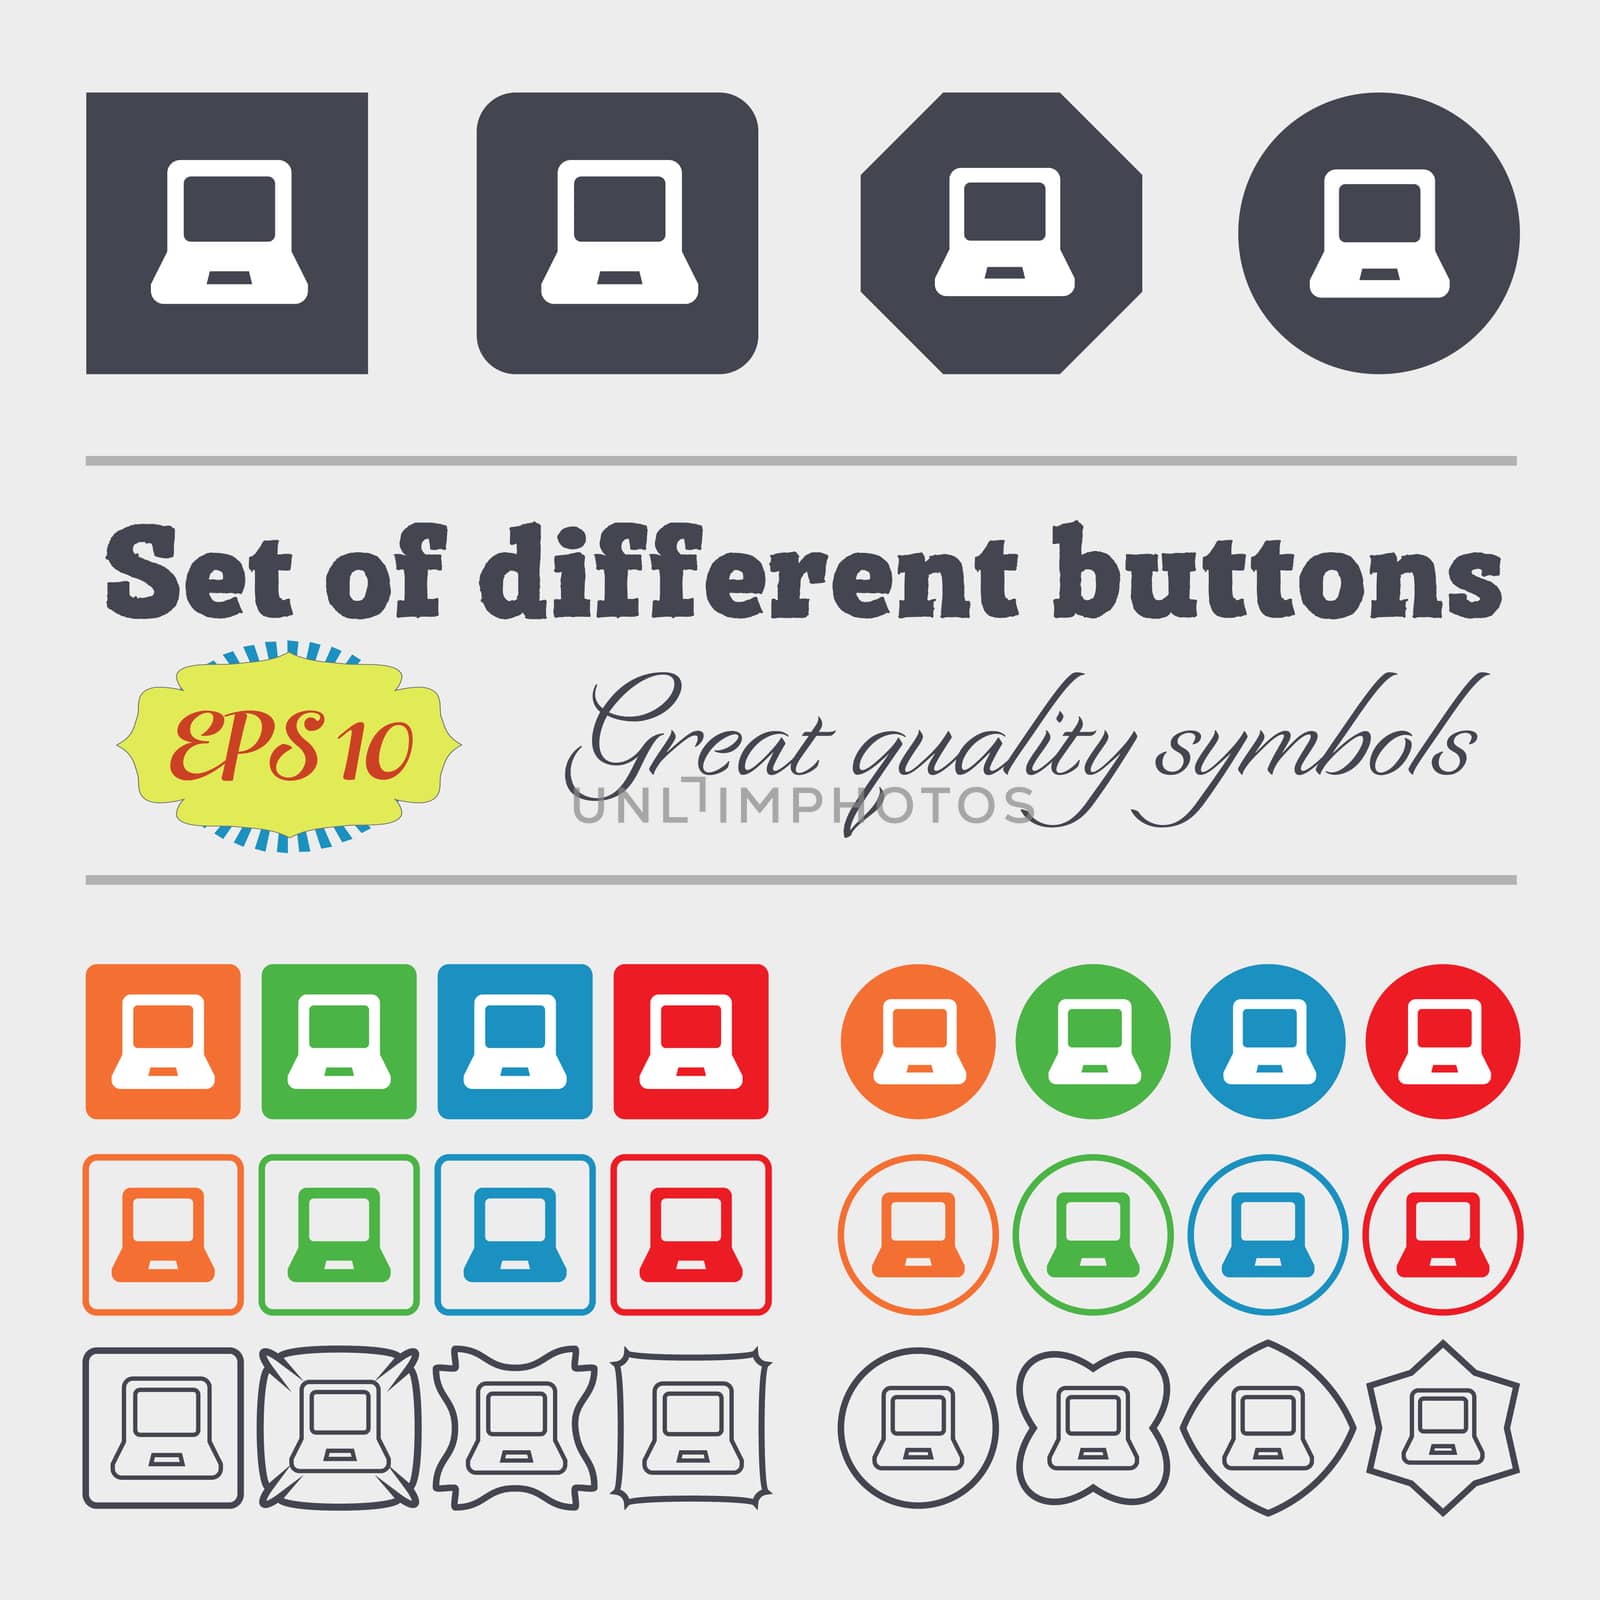 Laptop icon sign. Big set of colorful, diverse, high-quality buttons. illustration